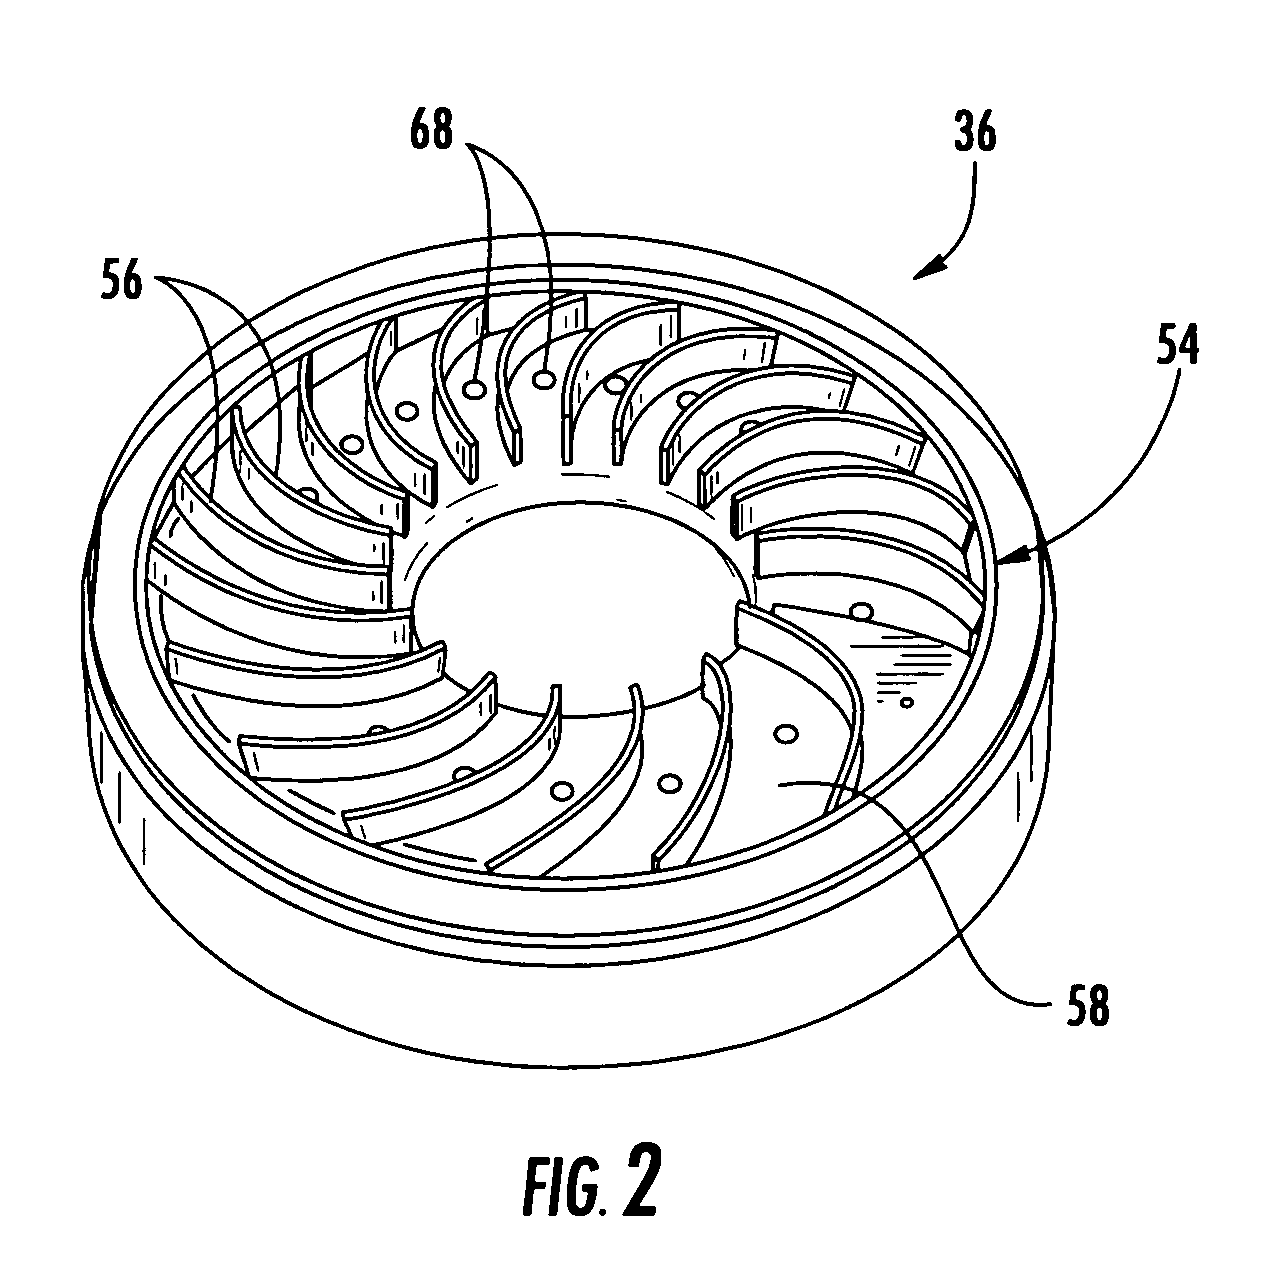 Turbocharger compressor having ported second-stage shroud, and associated method